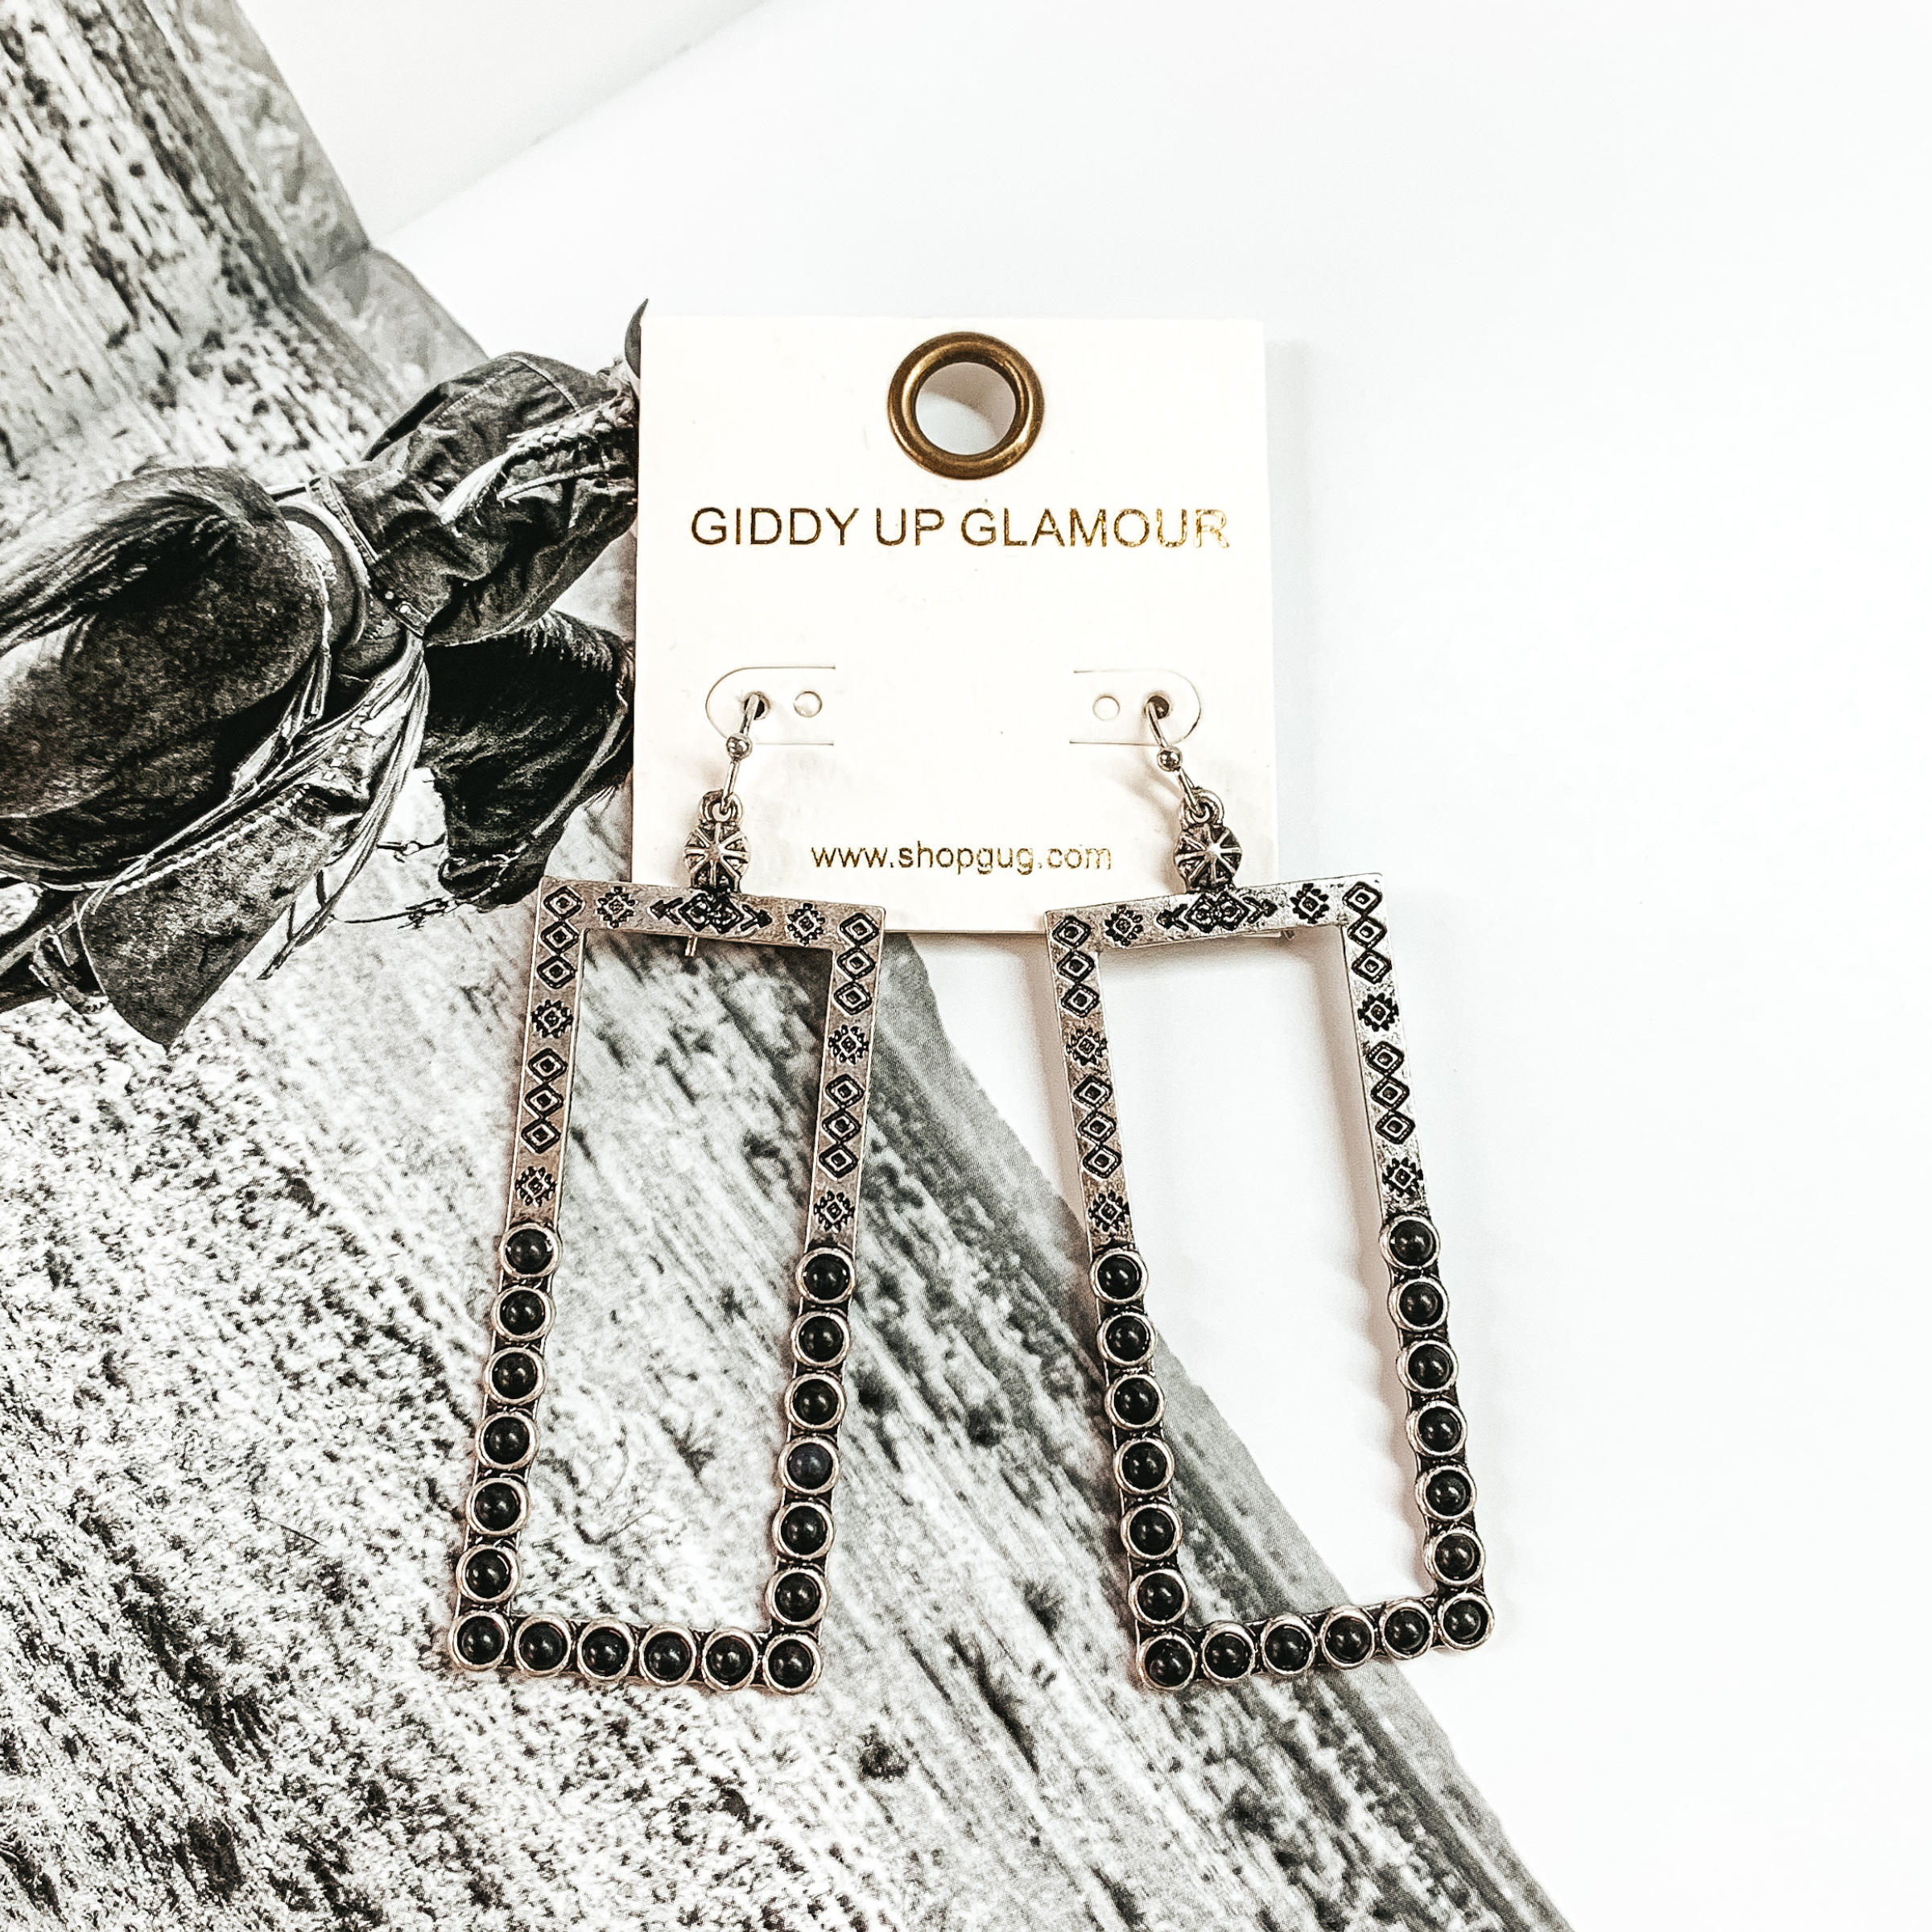 Silver, open rectangle dangle earrings. These earrings include engraving on the top half and black stones on the bottom half. These earrings are pictured on a black and white picture.